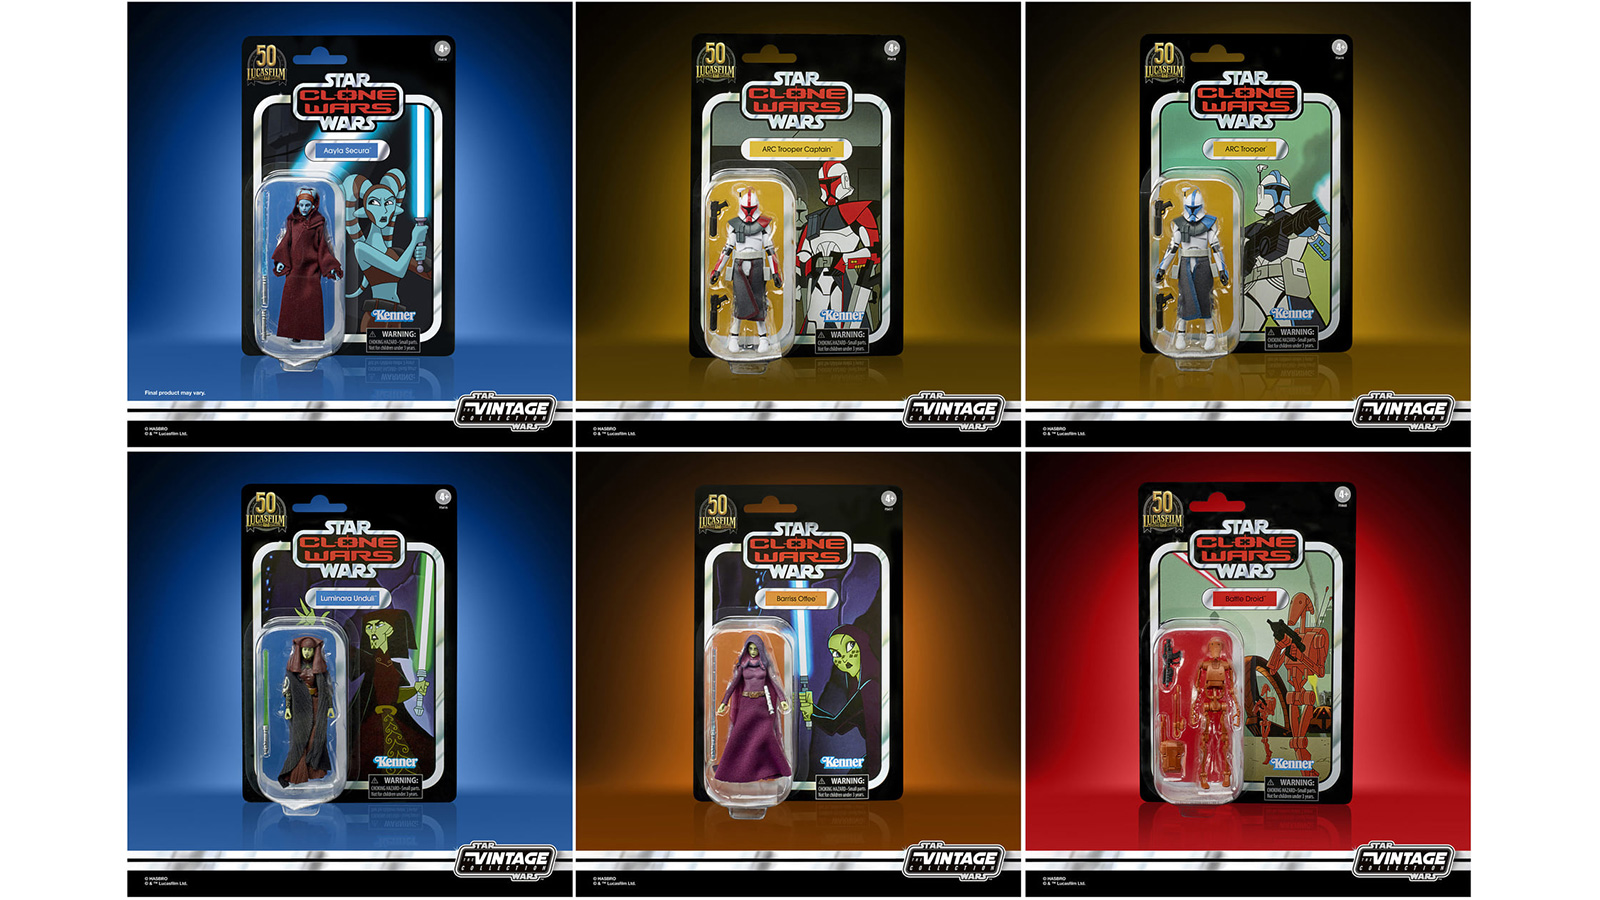 Back In Stock At Walmart.com - All 6 Exclusive The Vintage Collection 3.75-Inch Clone Wars 2D Micro Series Figures